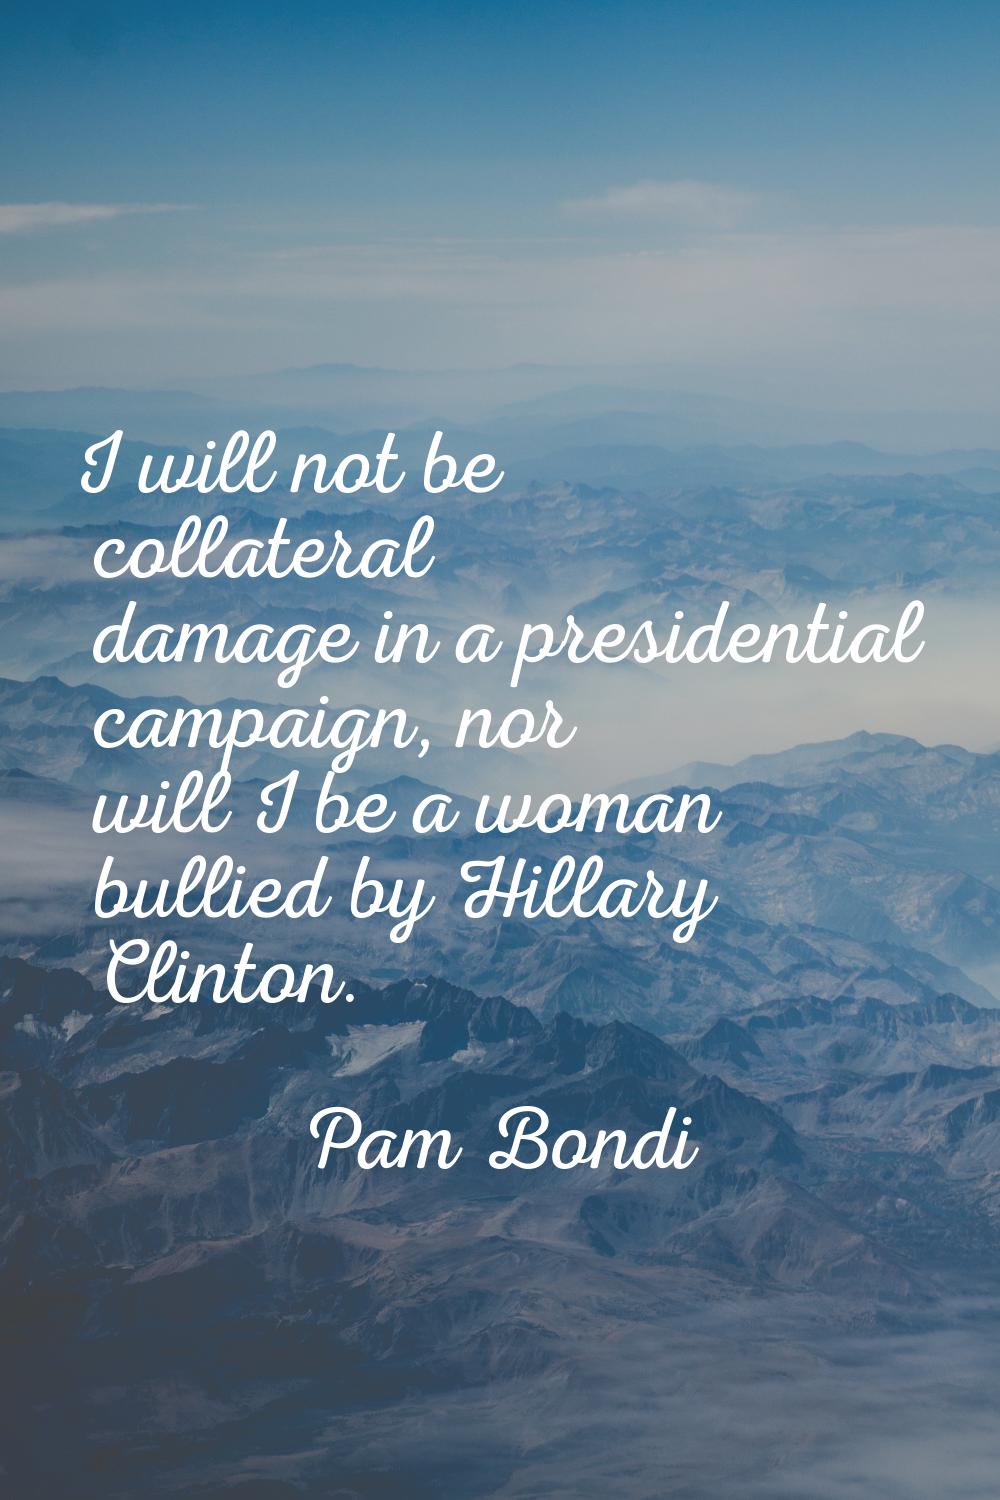 I will not be collateral damage in a presidential campaign, nor will I be a woman bullied by Hillar